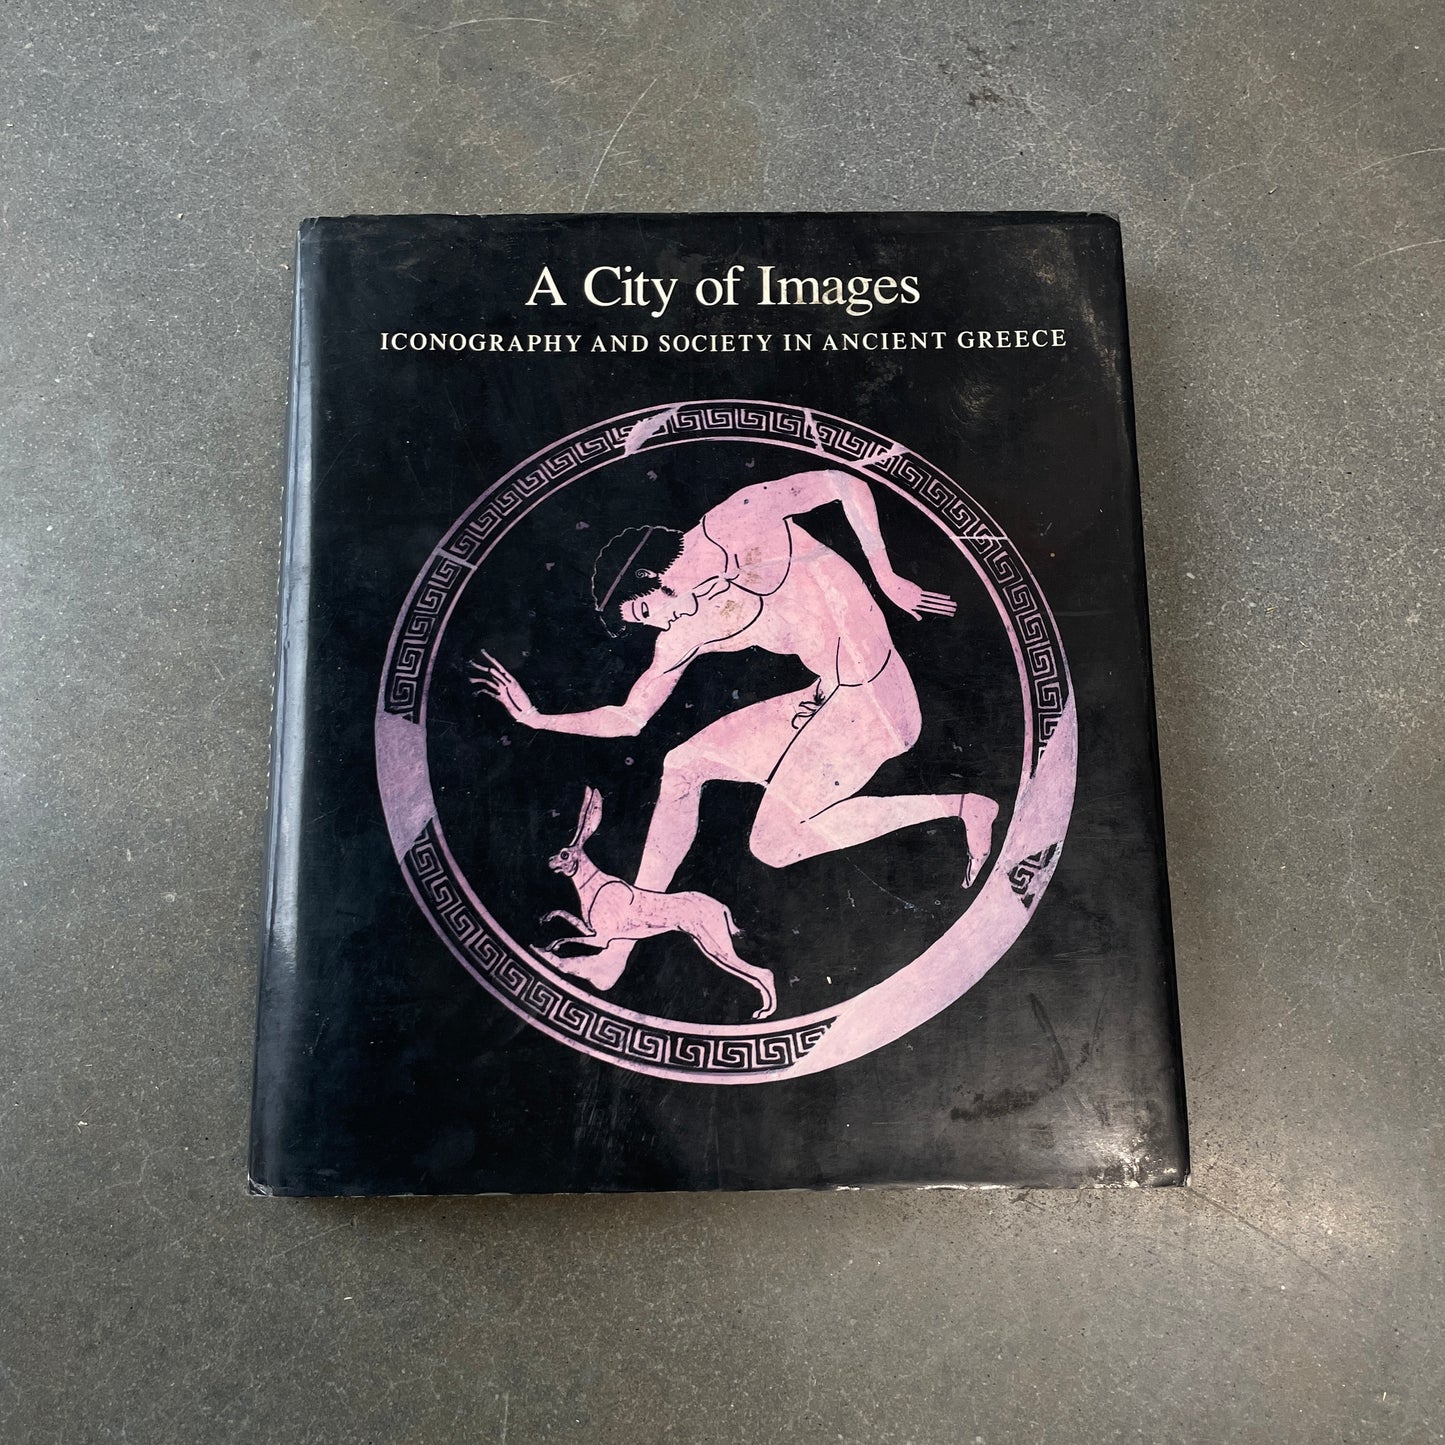 1989 A City of Images Iconography and Society in Ancient Greece Coffee Table Book